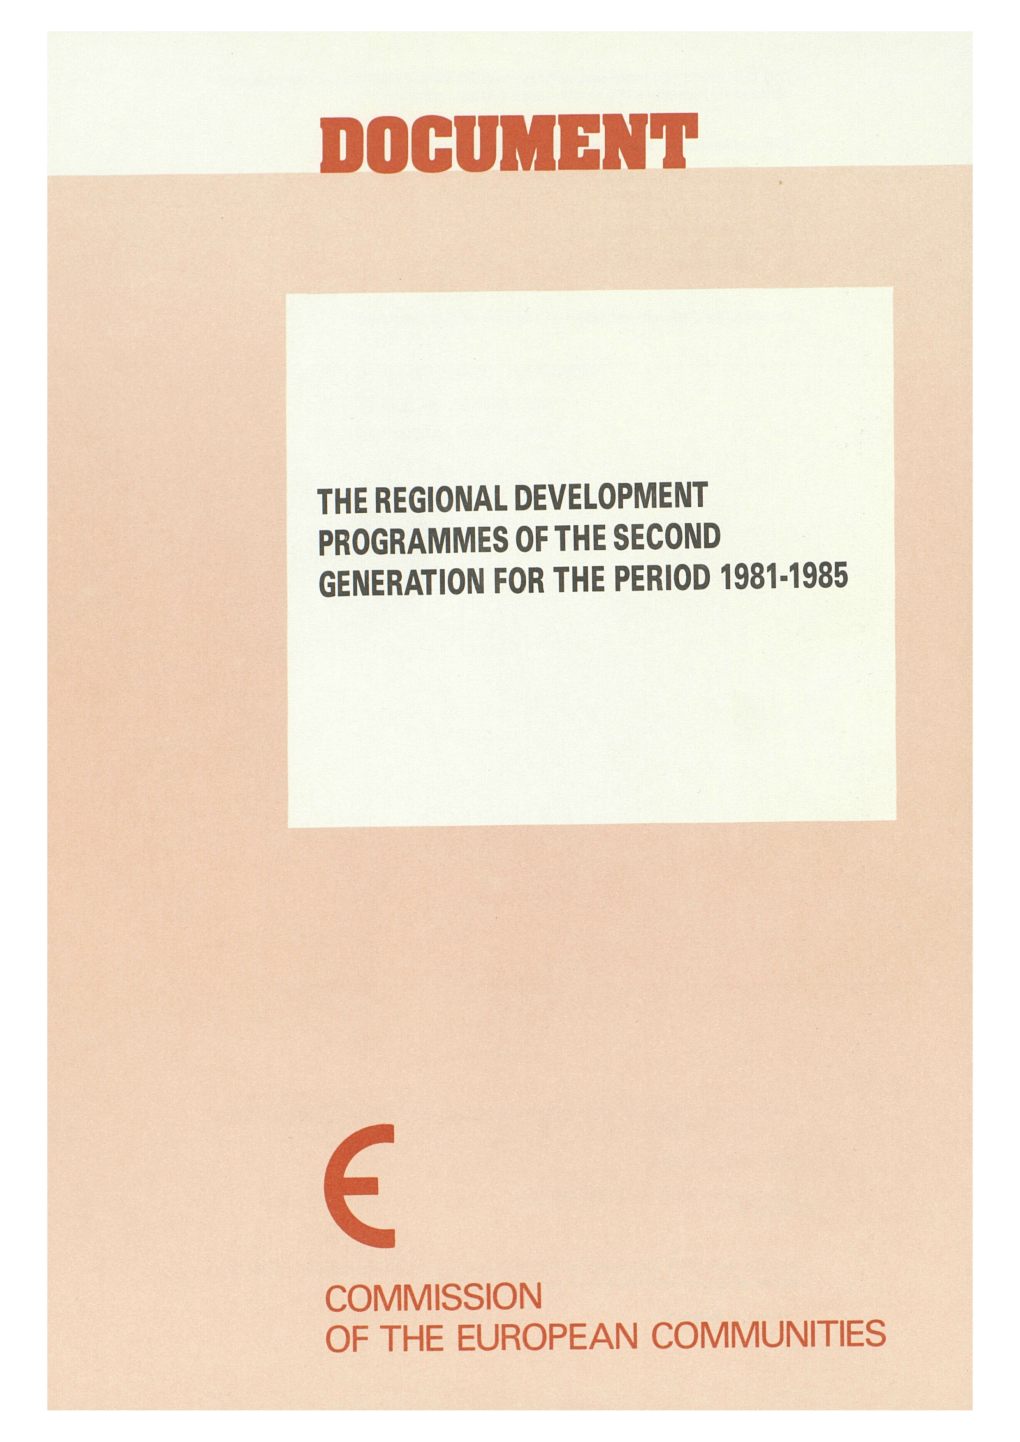 The Regional Development Programmes of the Second Generation for the Period 1981-1985